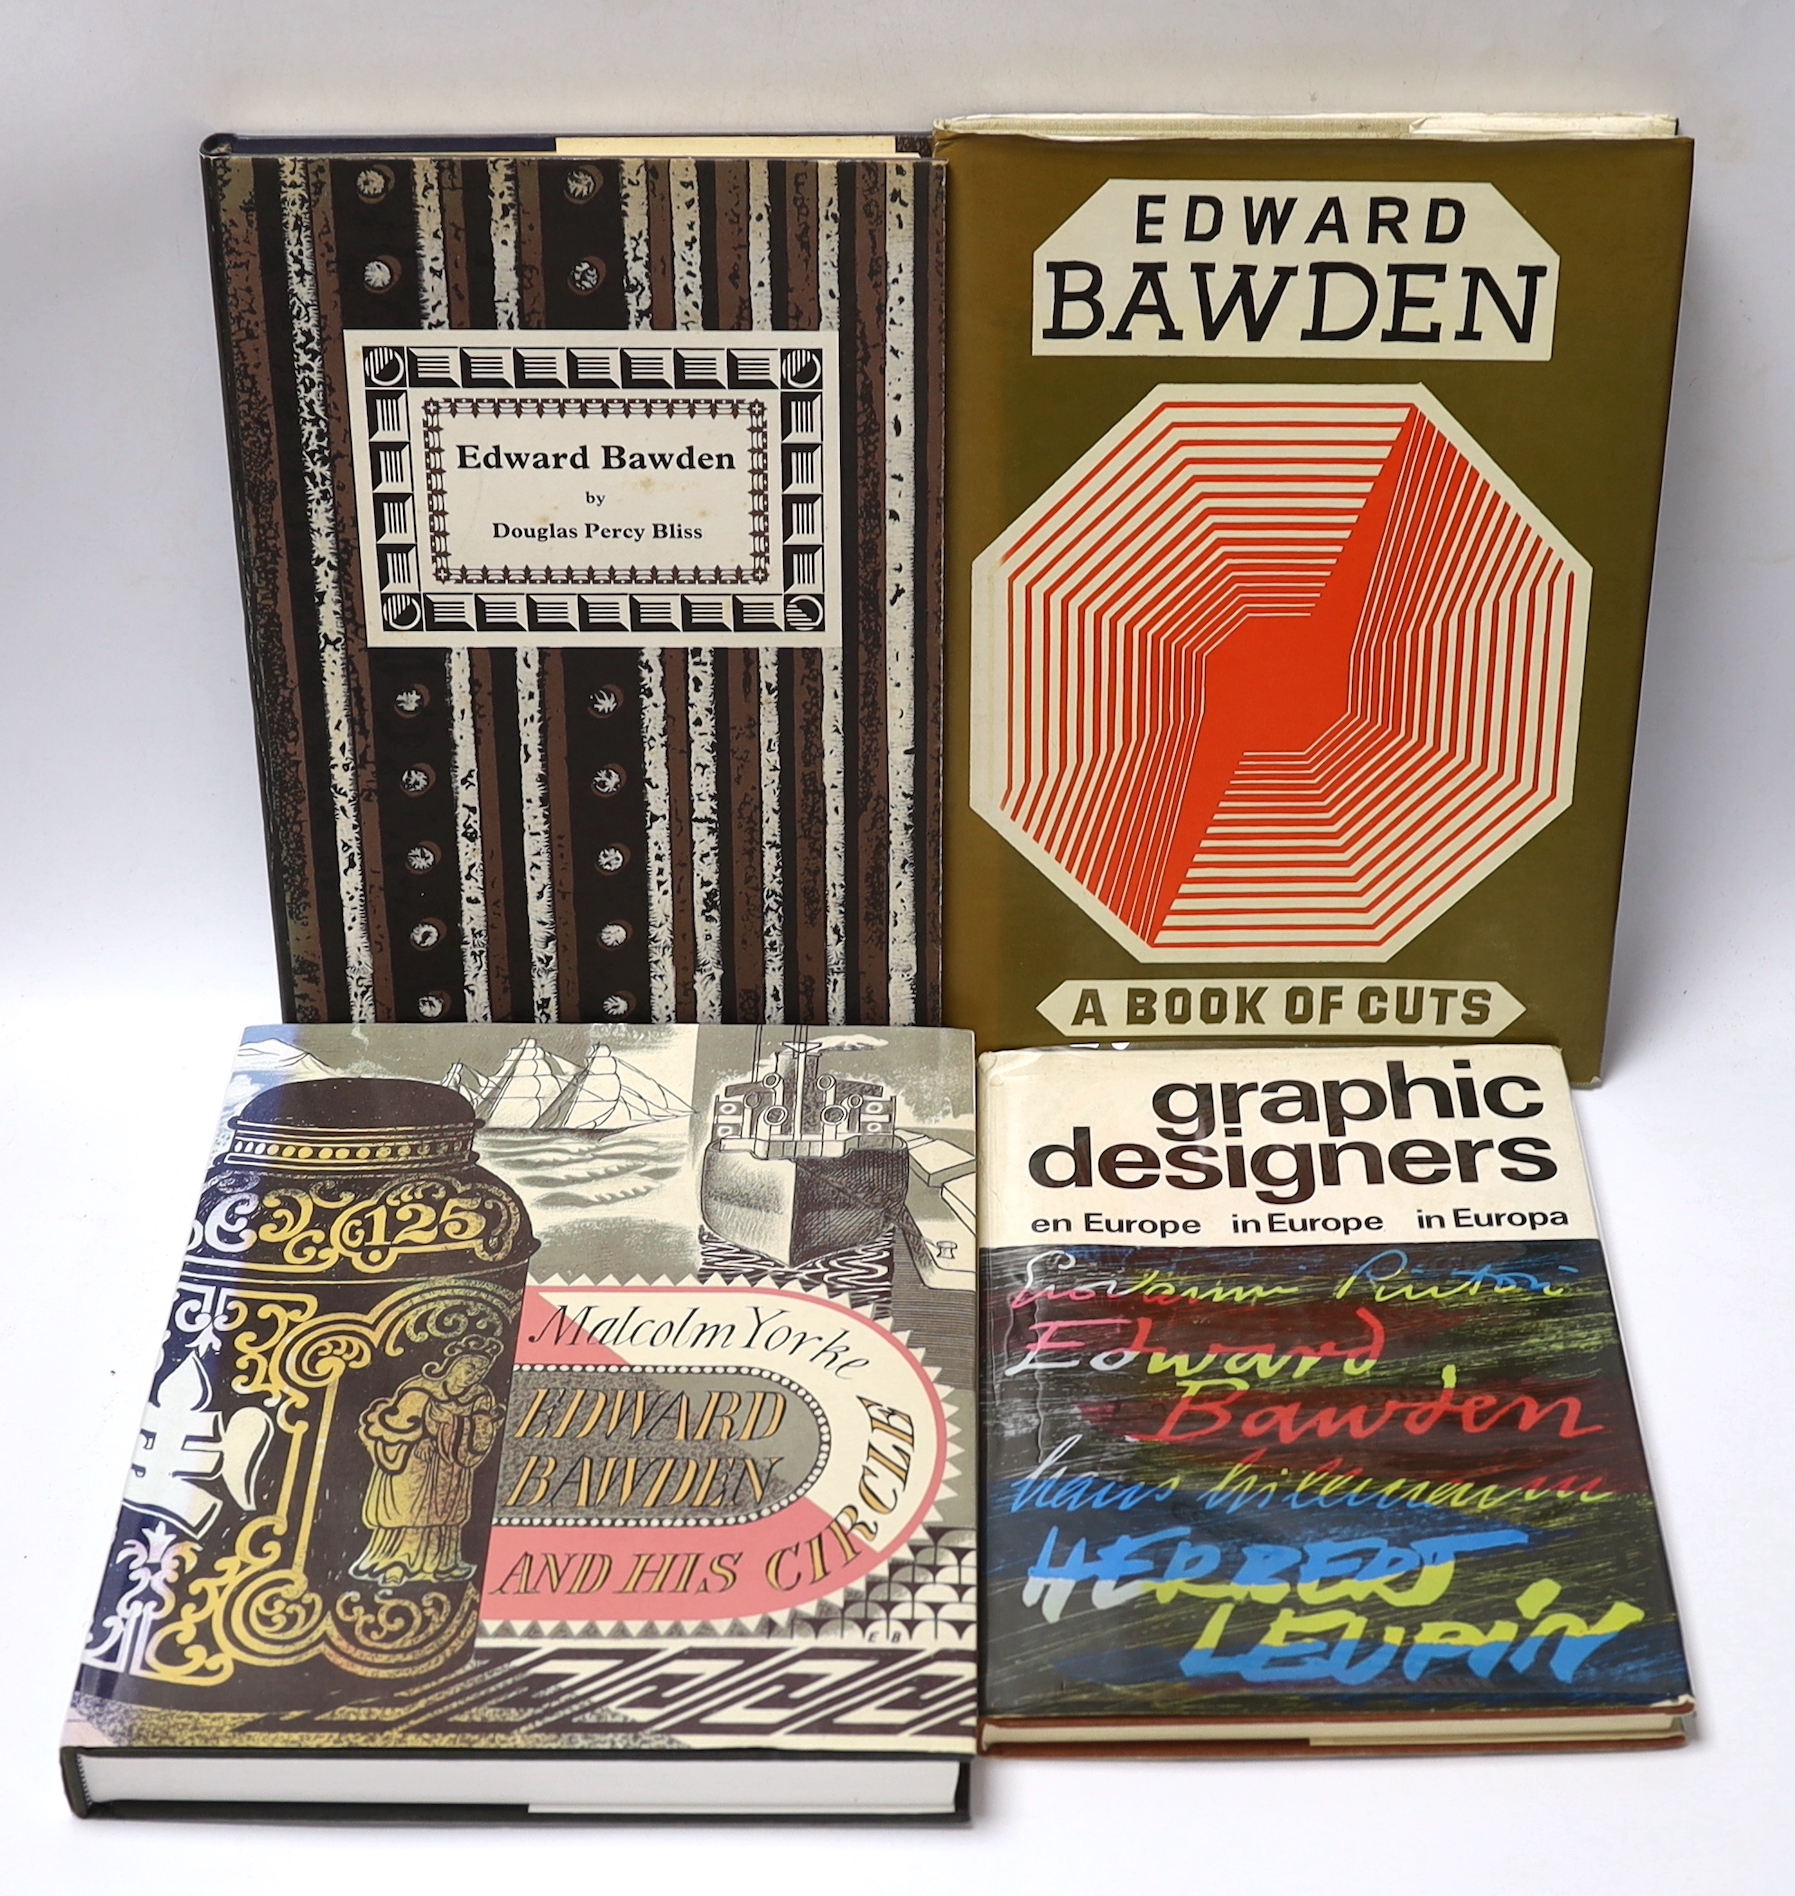 Bawden, Edward - 8 works with dust jackets and other illustrations by Edward Bawden, consisting - BBC Year Book 1947; Pintori, Giovanni, Bawden, Edward and others - Graphic Designers in Europe, 1972; Bliss, Percy Douglas